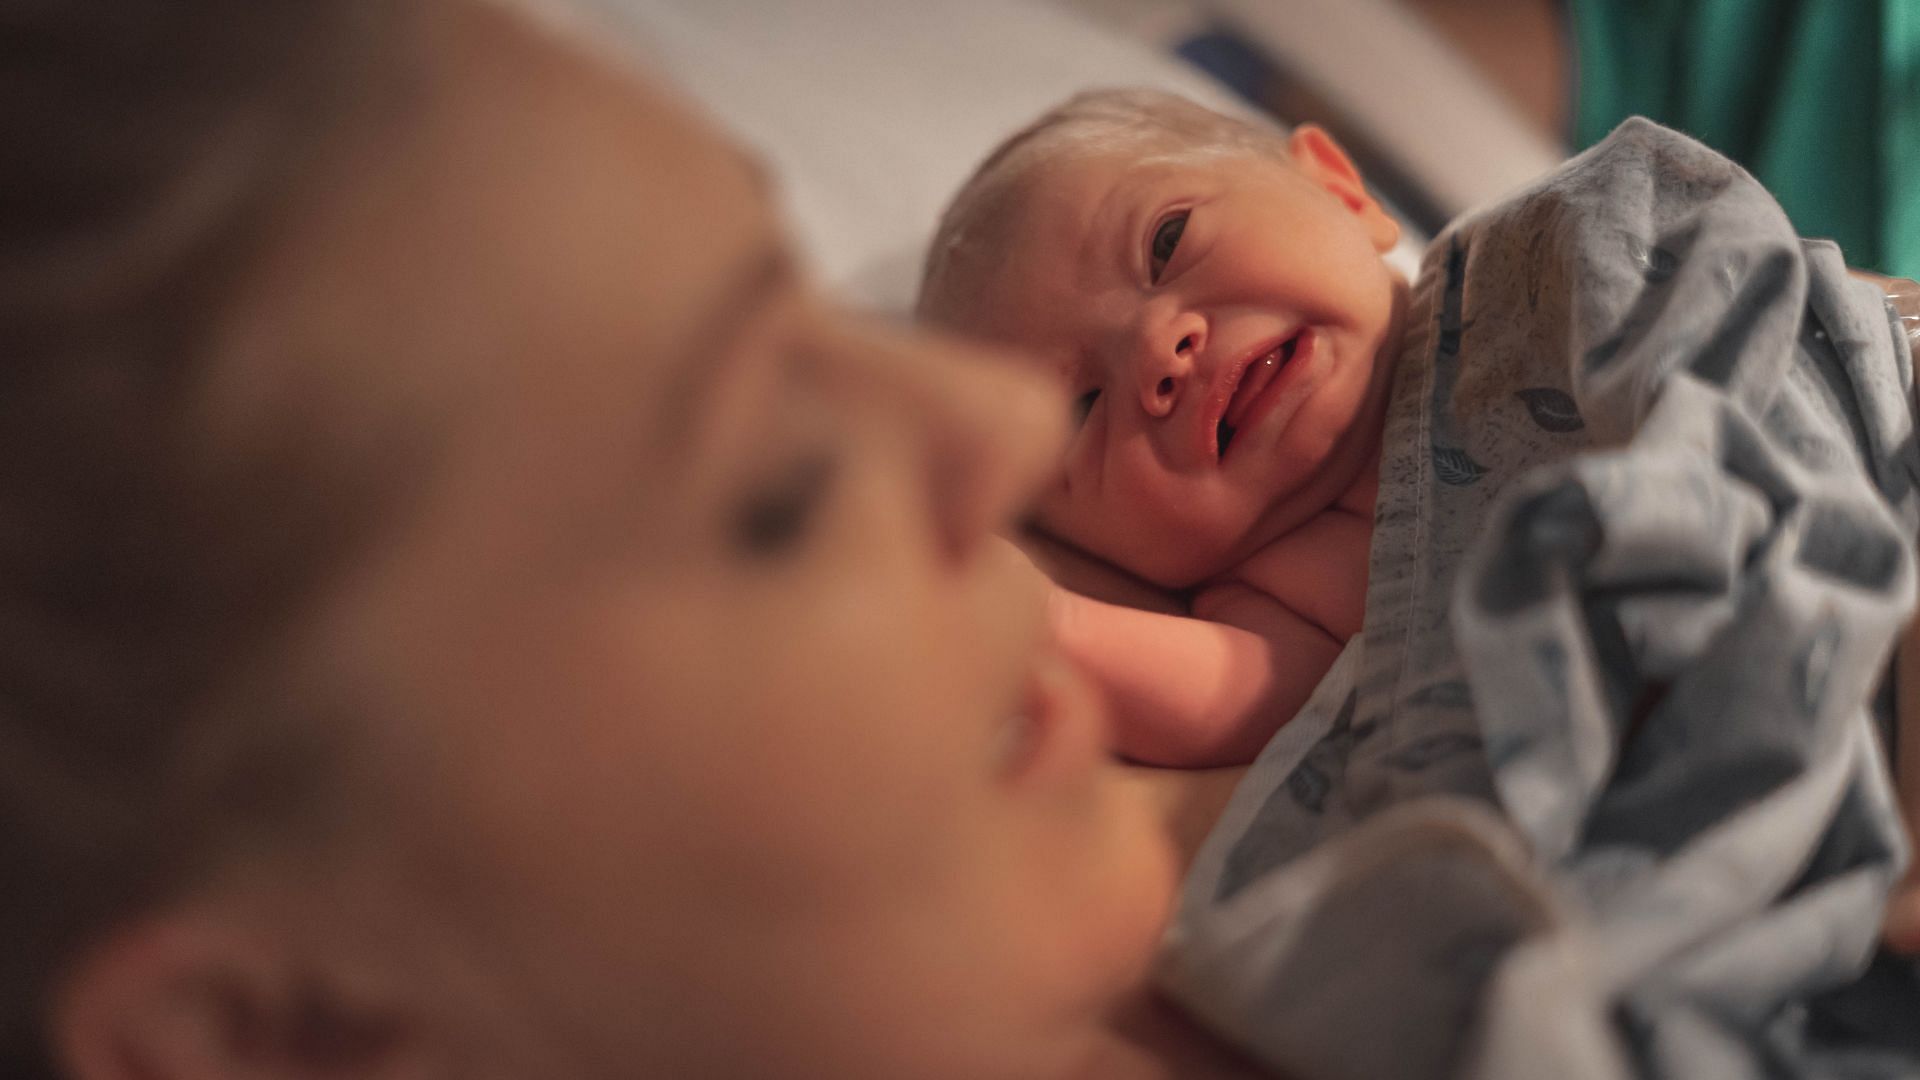 Colic is a condition in young infants (Image via Unsplash/Jimmy Conover)